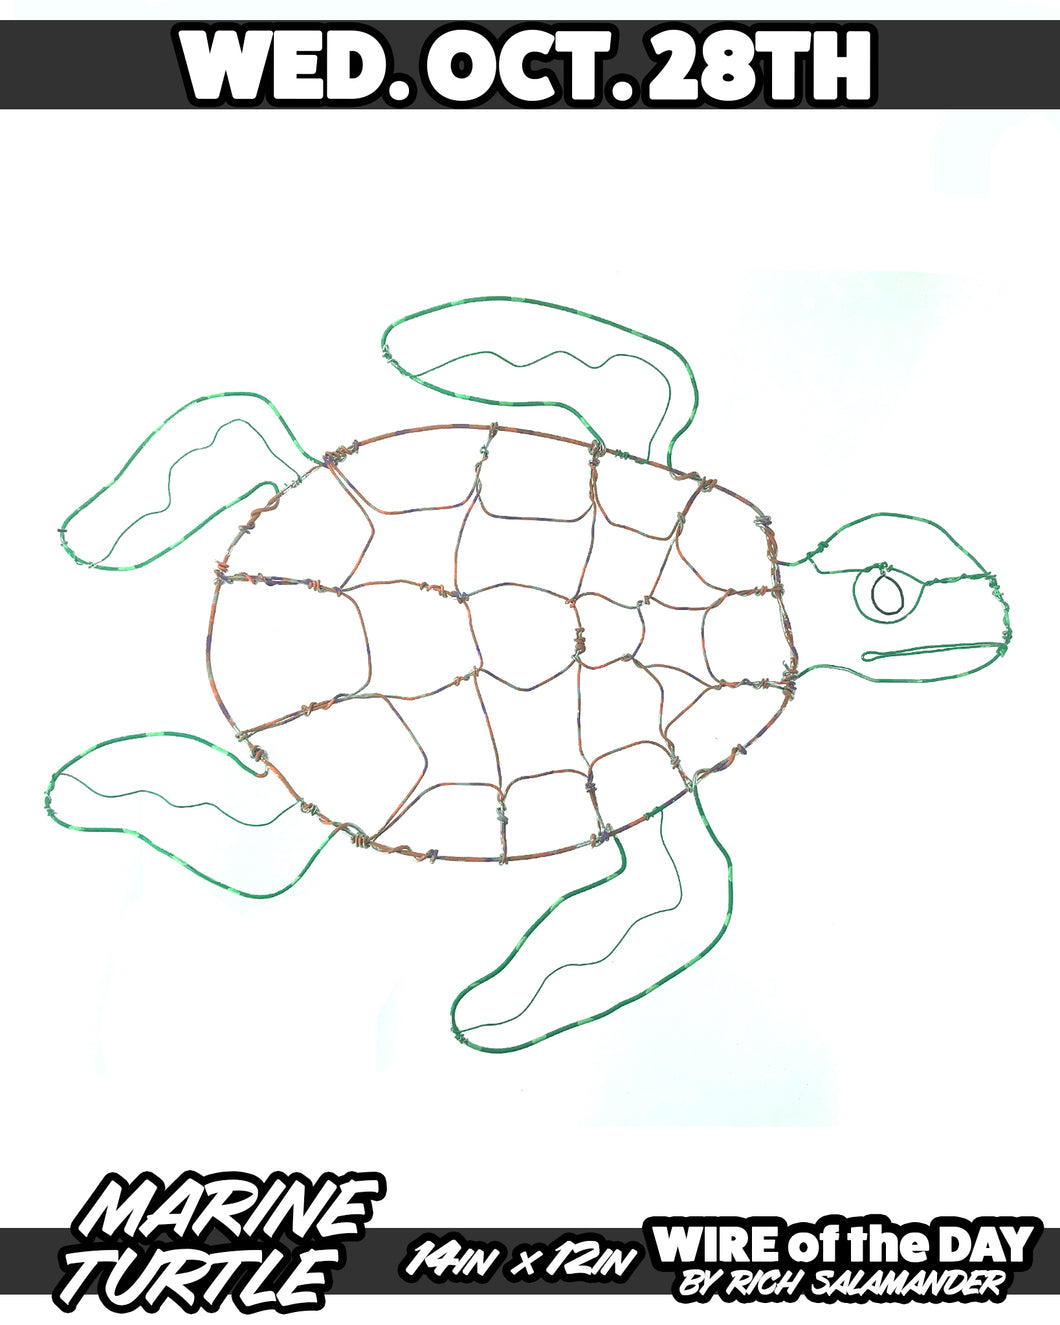 WIRE of the DAY MARINE TURTLE